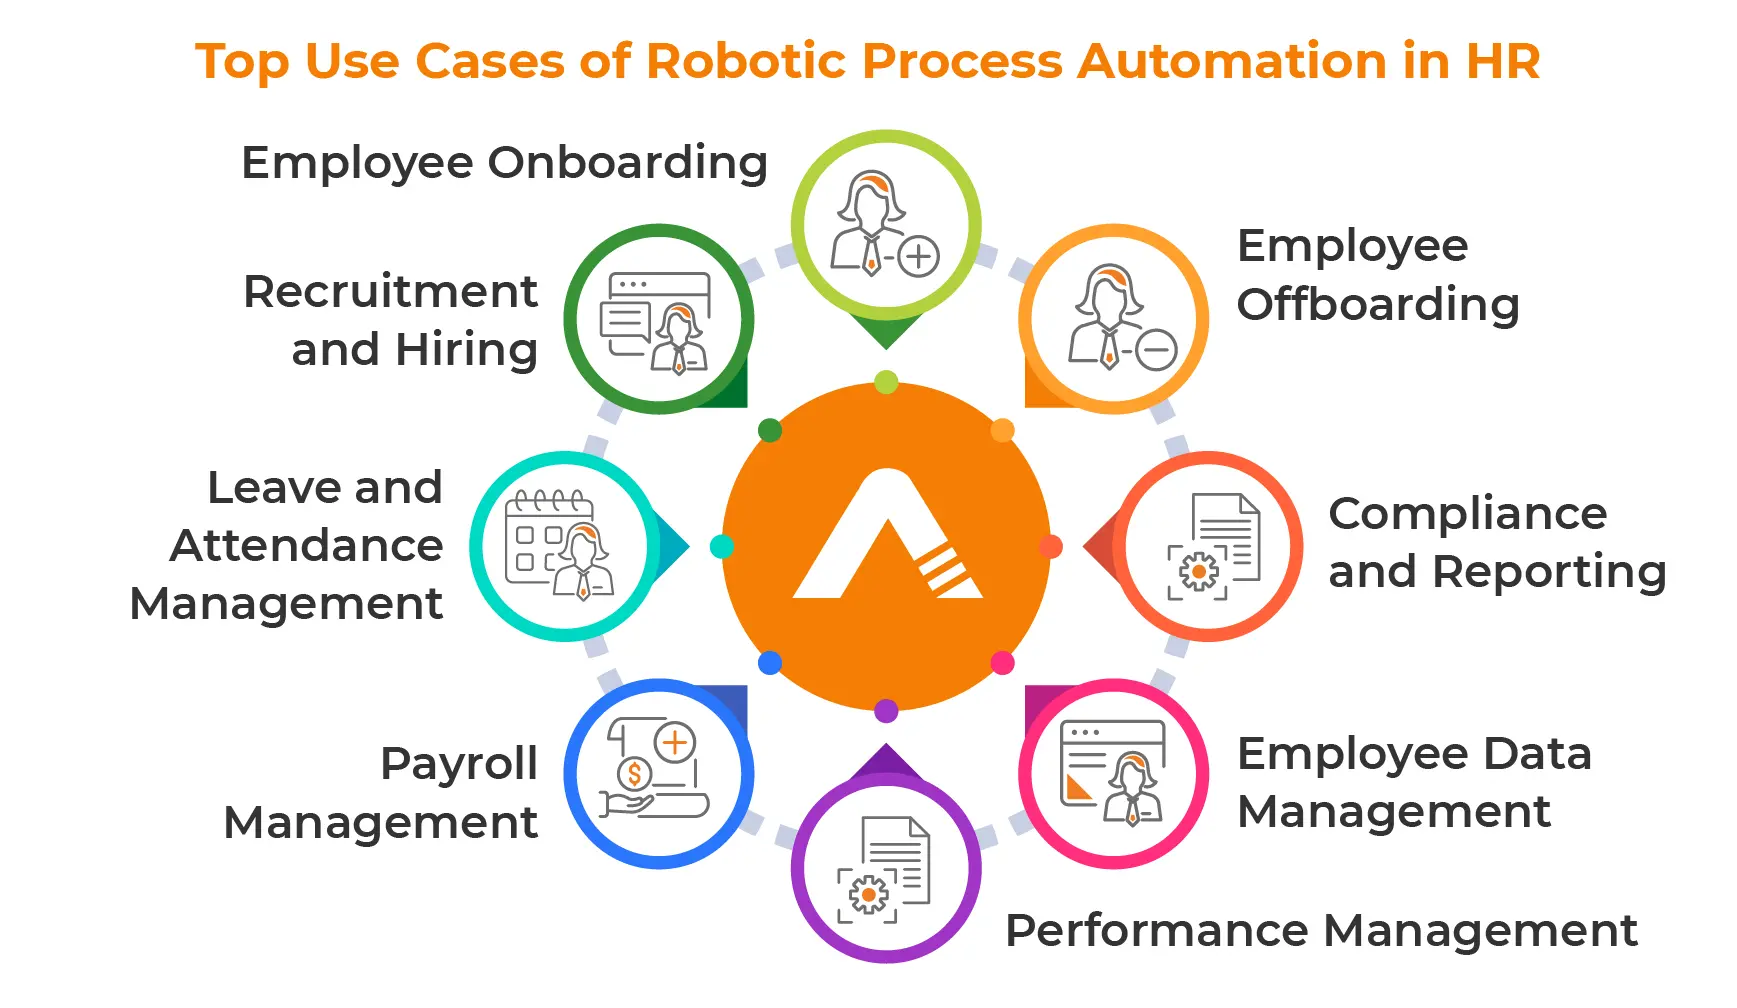 Top Use Cases of Robotic Process Automation in HR